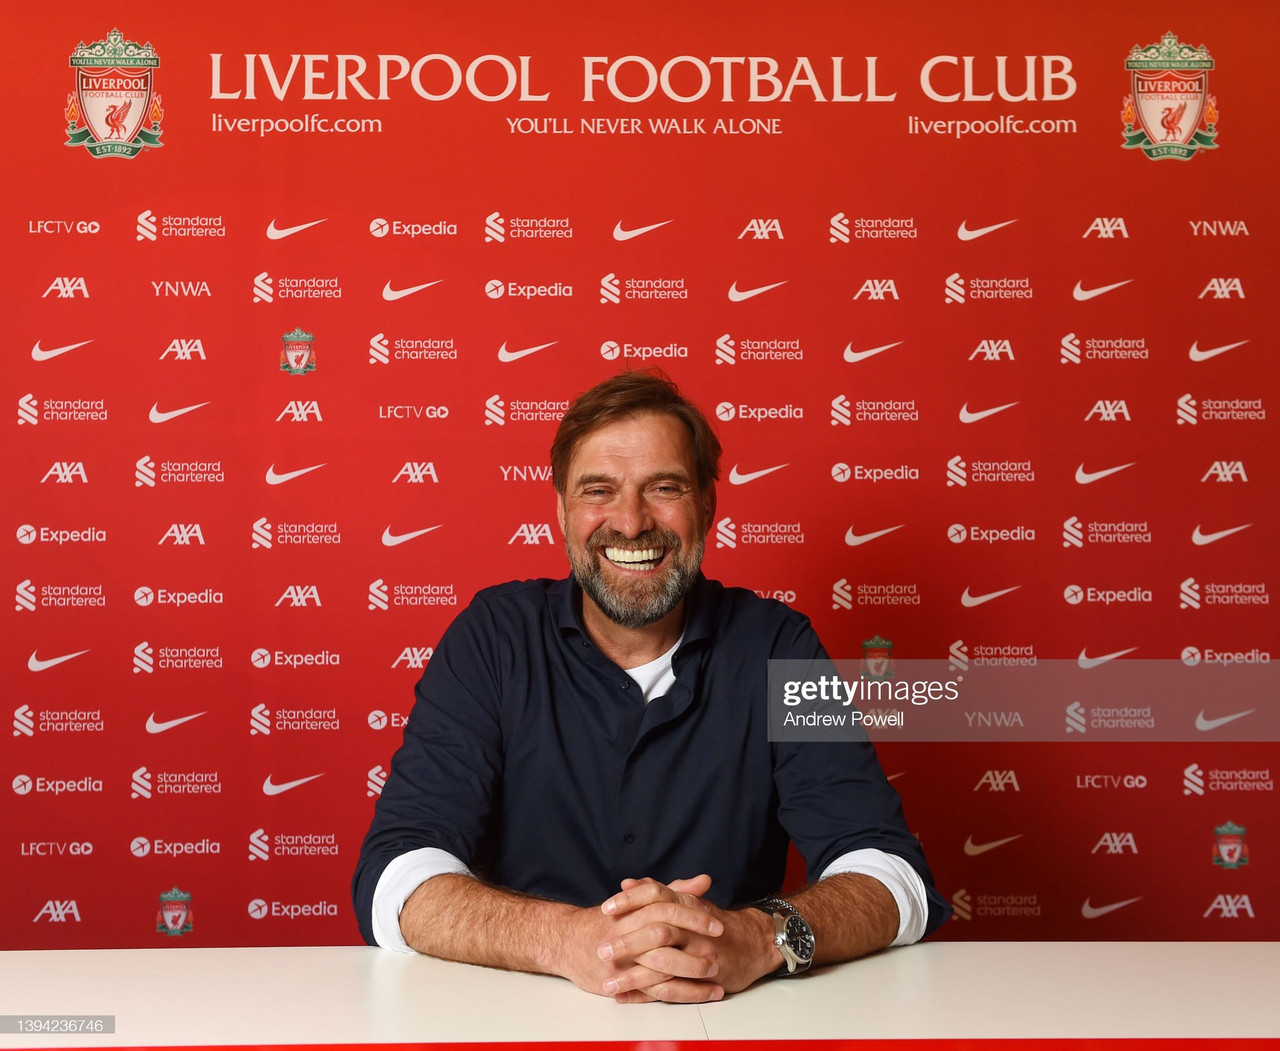 Jurgen Klopp: “We want to make this club successful for as long as possible”